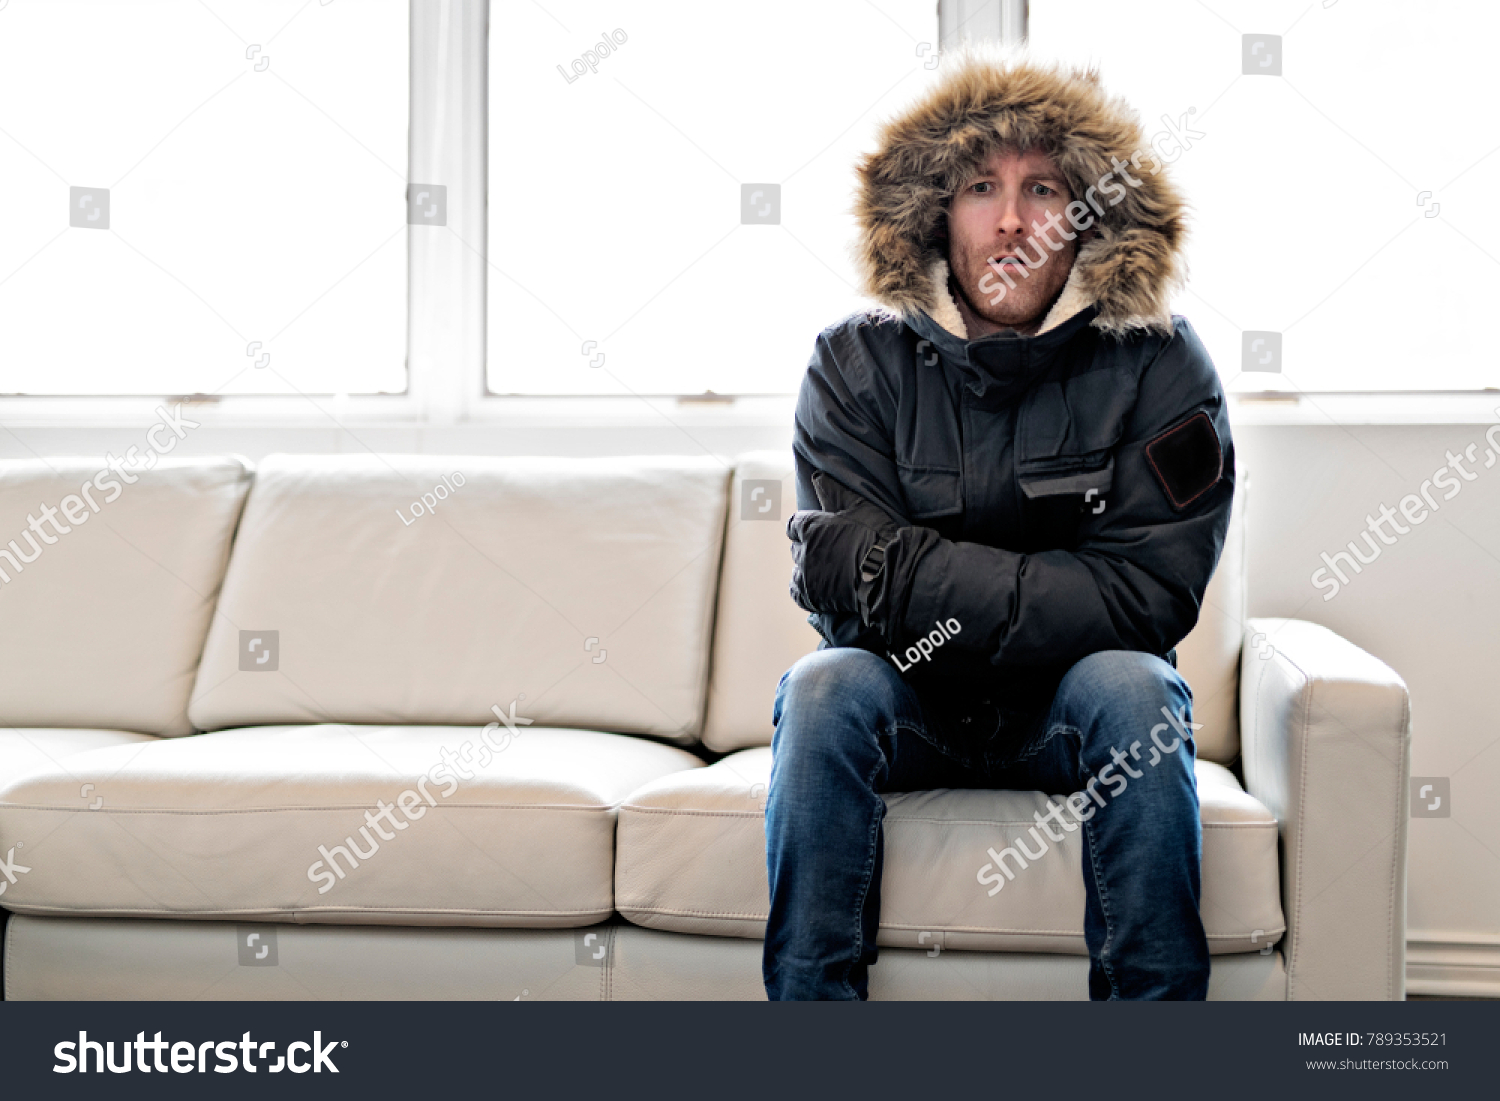 Man With Warm Clothing Feeling The Cold Inside House on the sofa #789353521